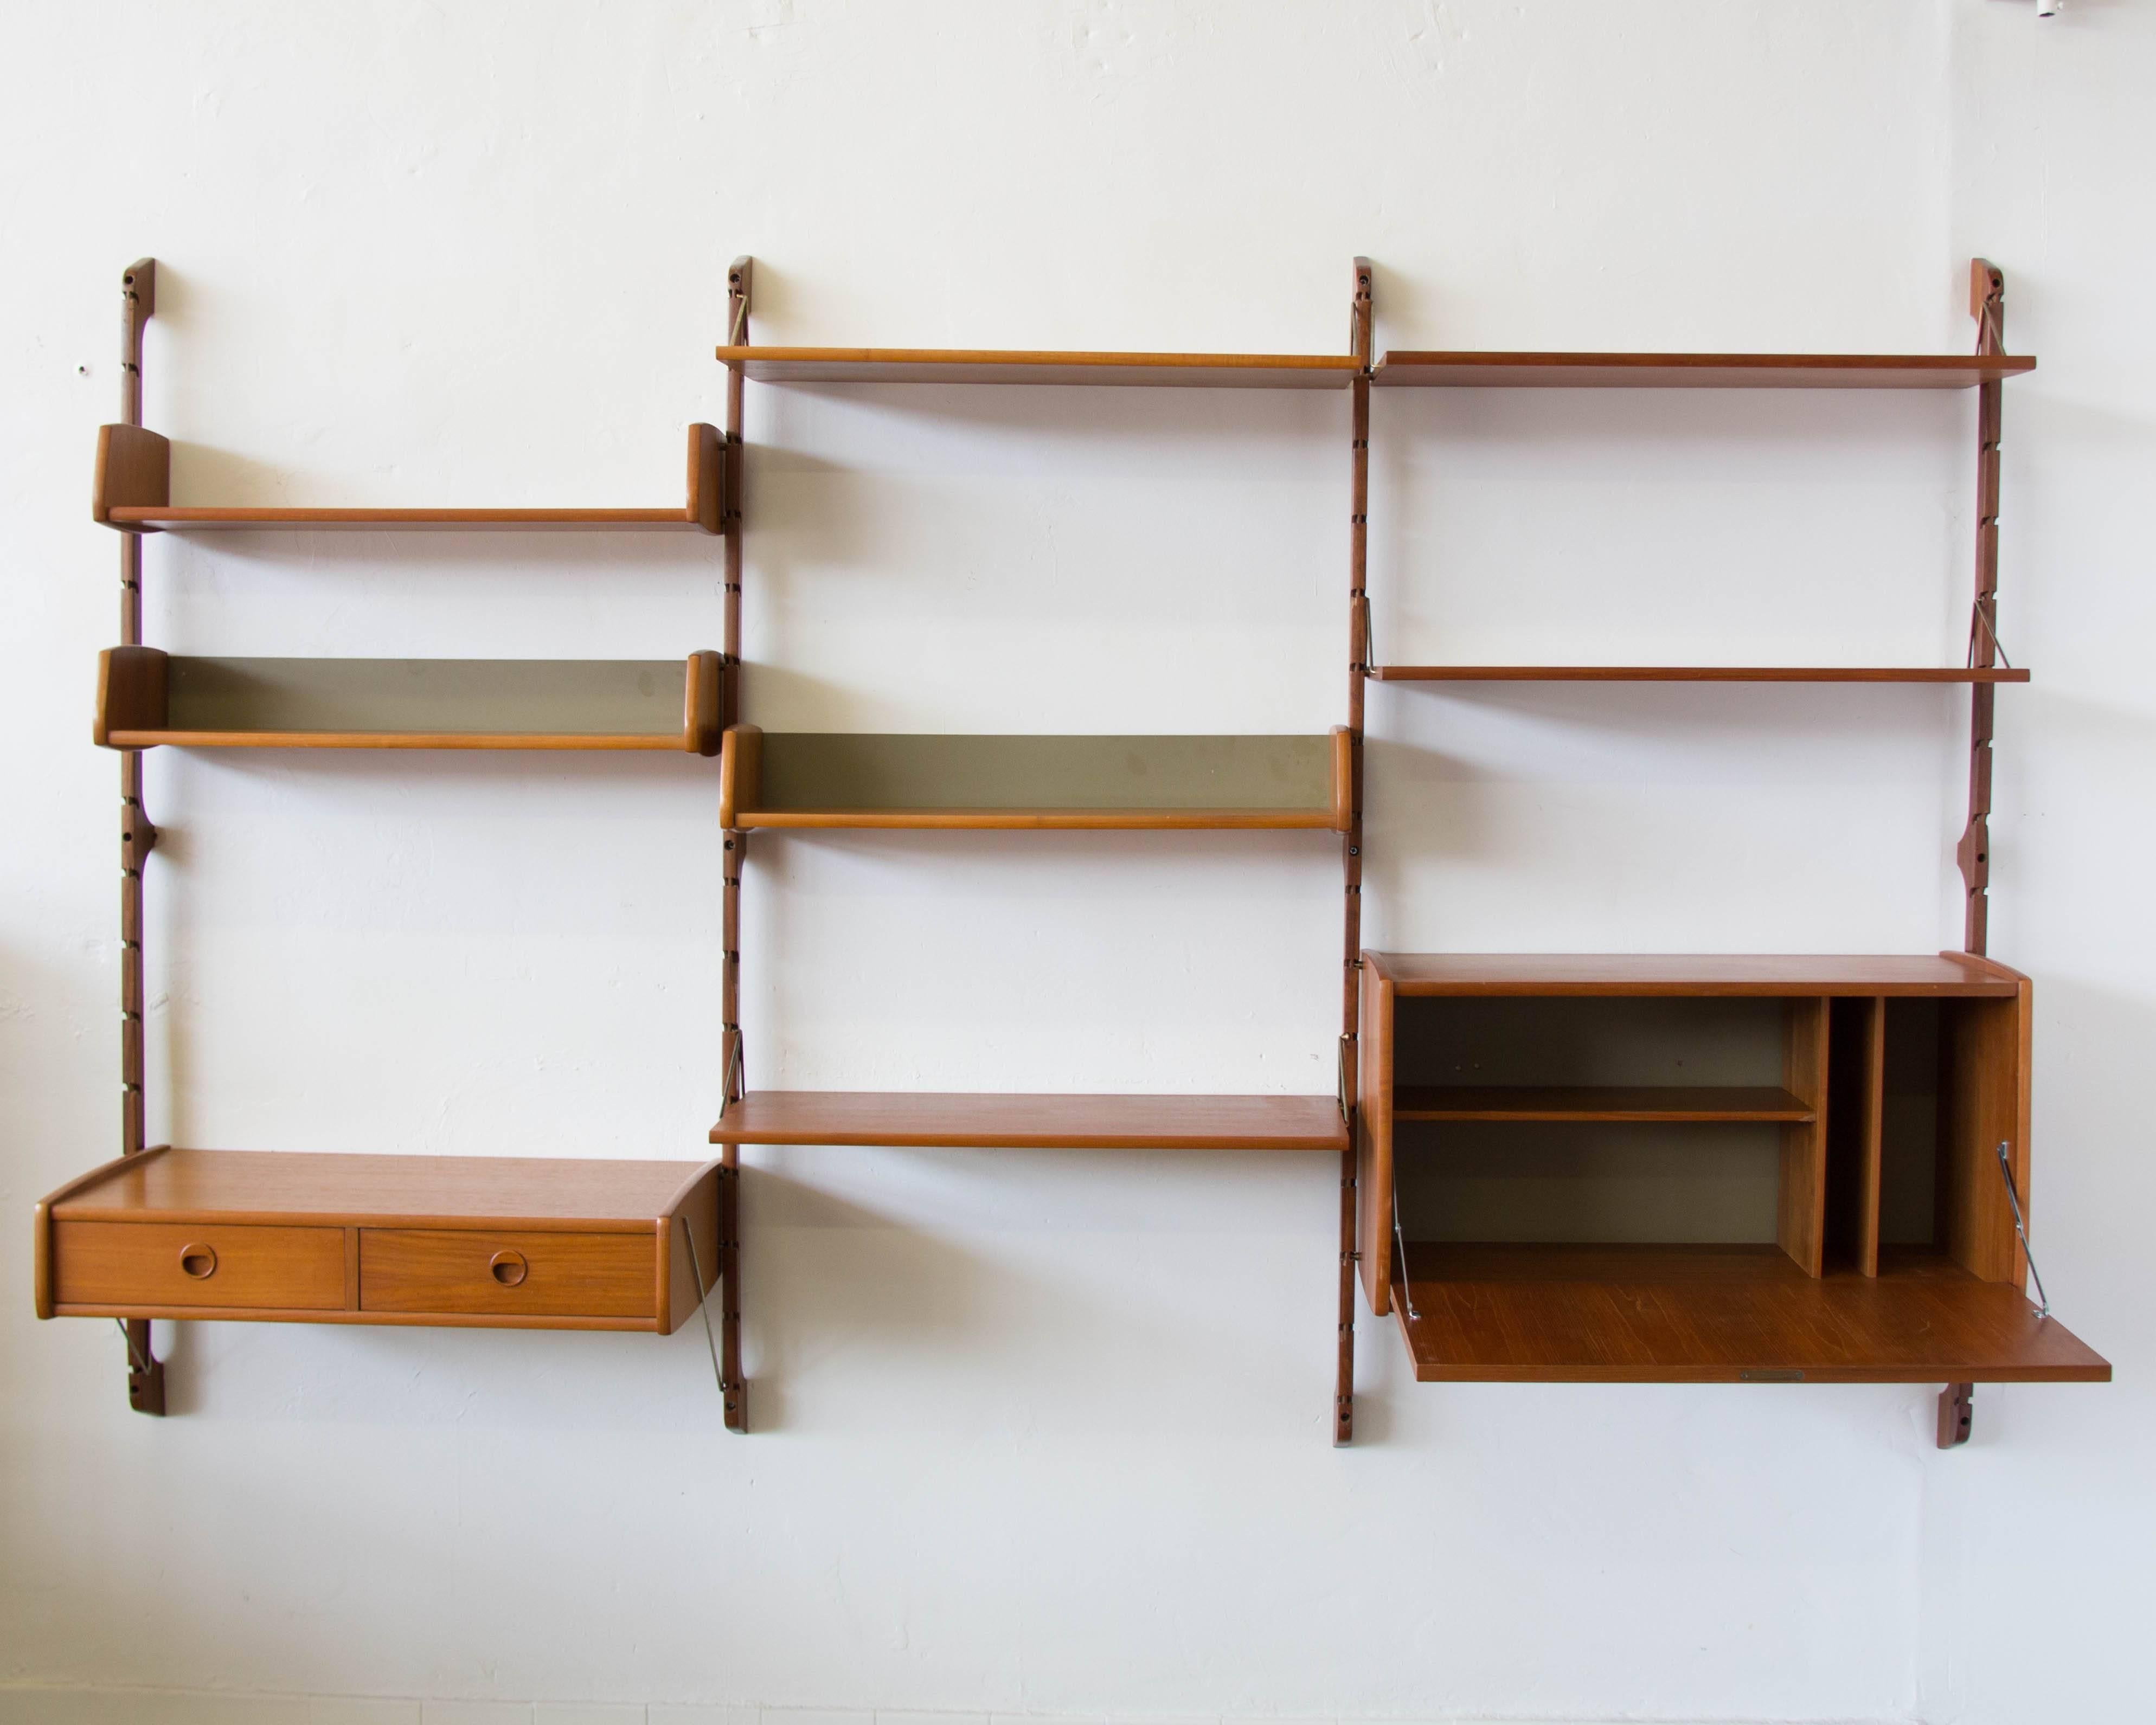 A 1960s Norwegian teak wall unit with three bays and four uprights. Left bay has a storage compartment with two drawers and two shelves above. The center bay has three shelves. The right bay has a storage compartment with a fold-down secretary style